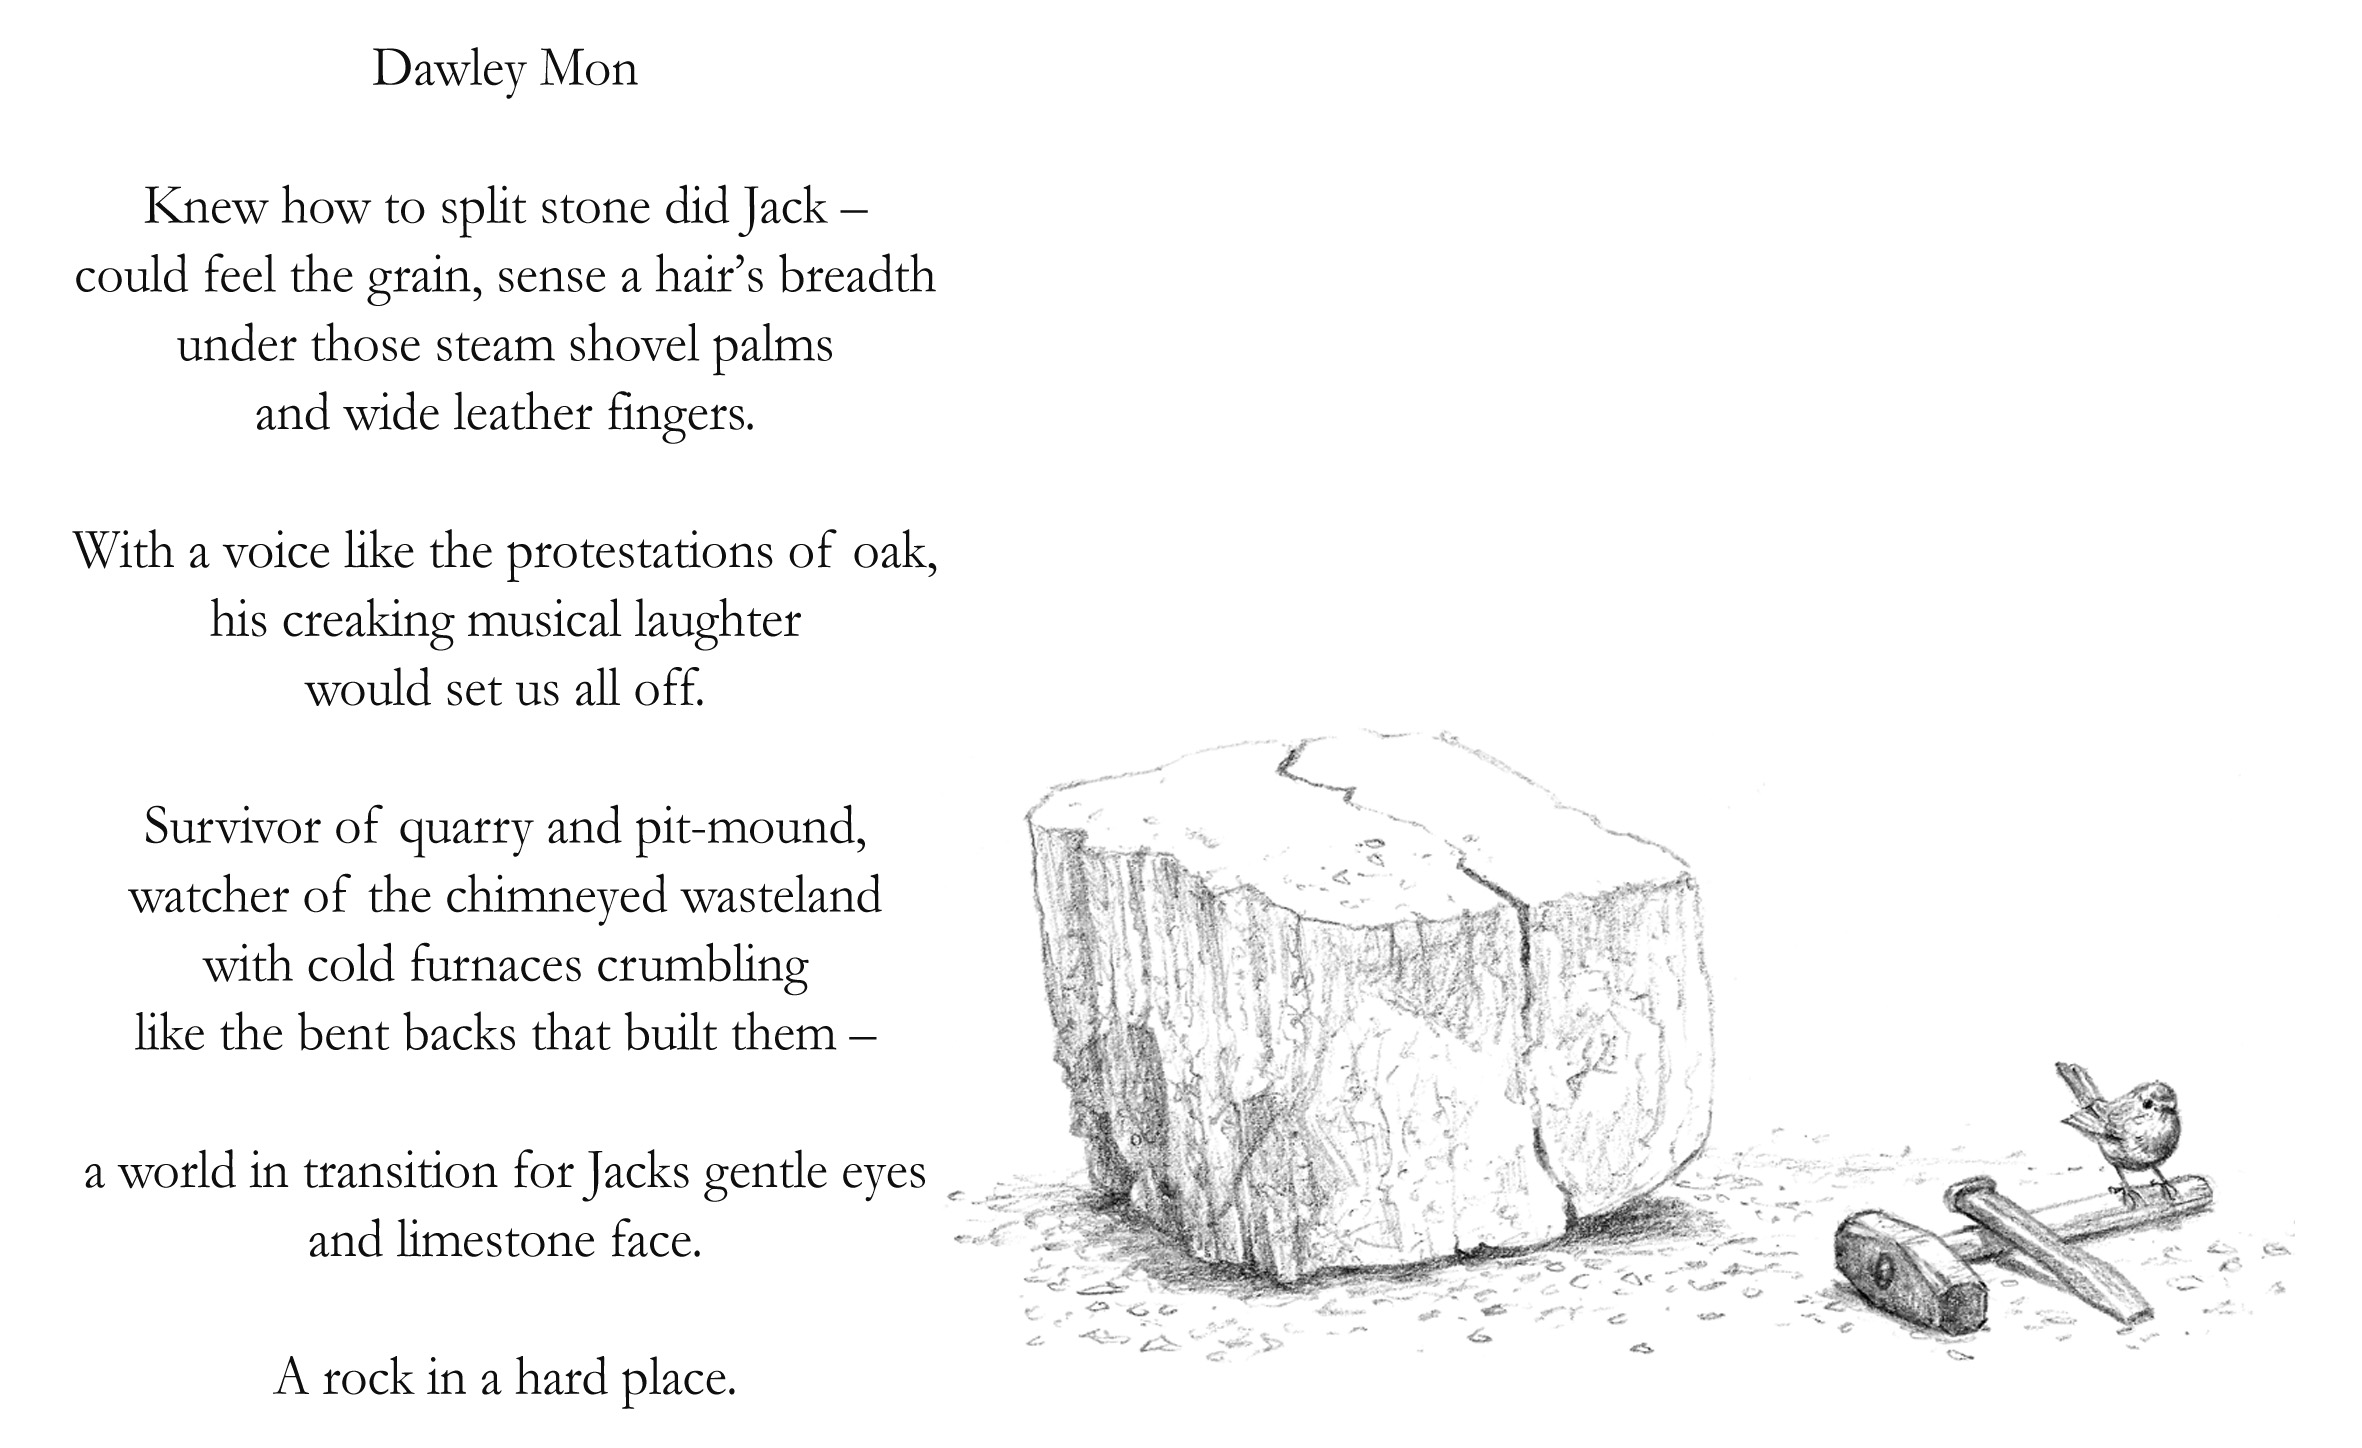 the poem Dawley Mon is part of the artwork here which features a stone block with quarryman's tools